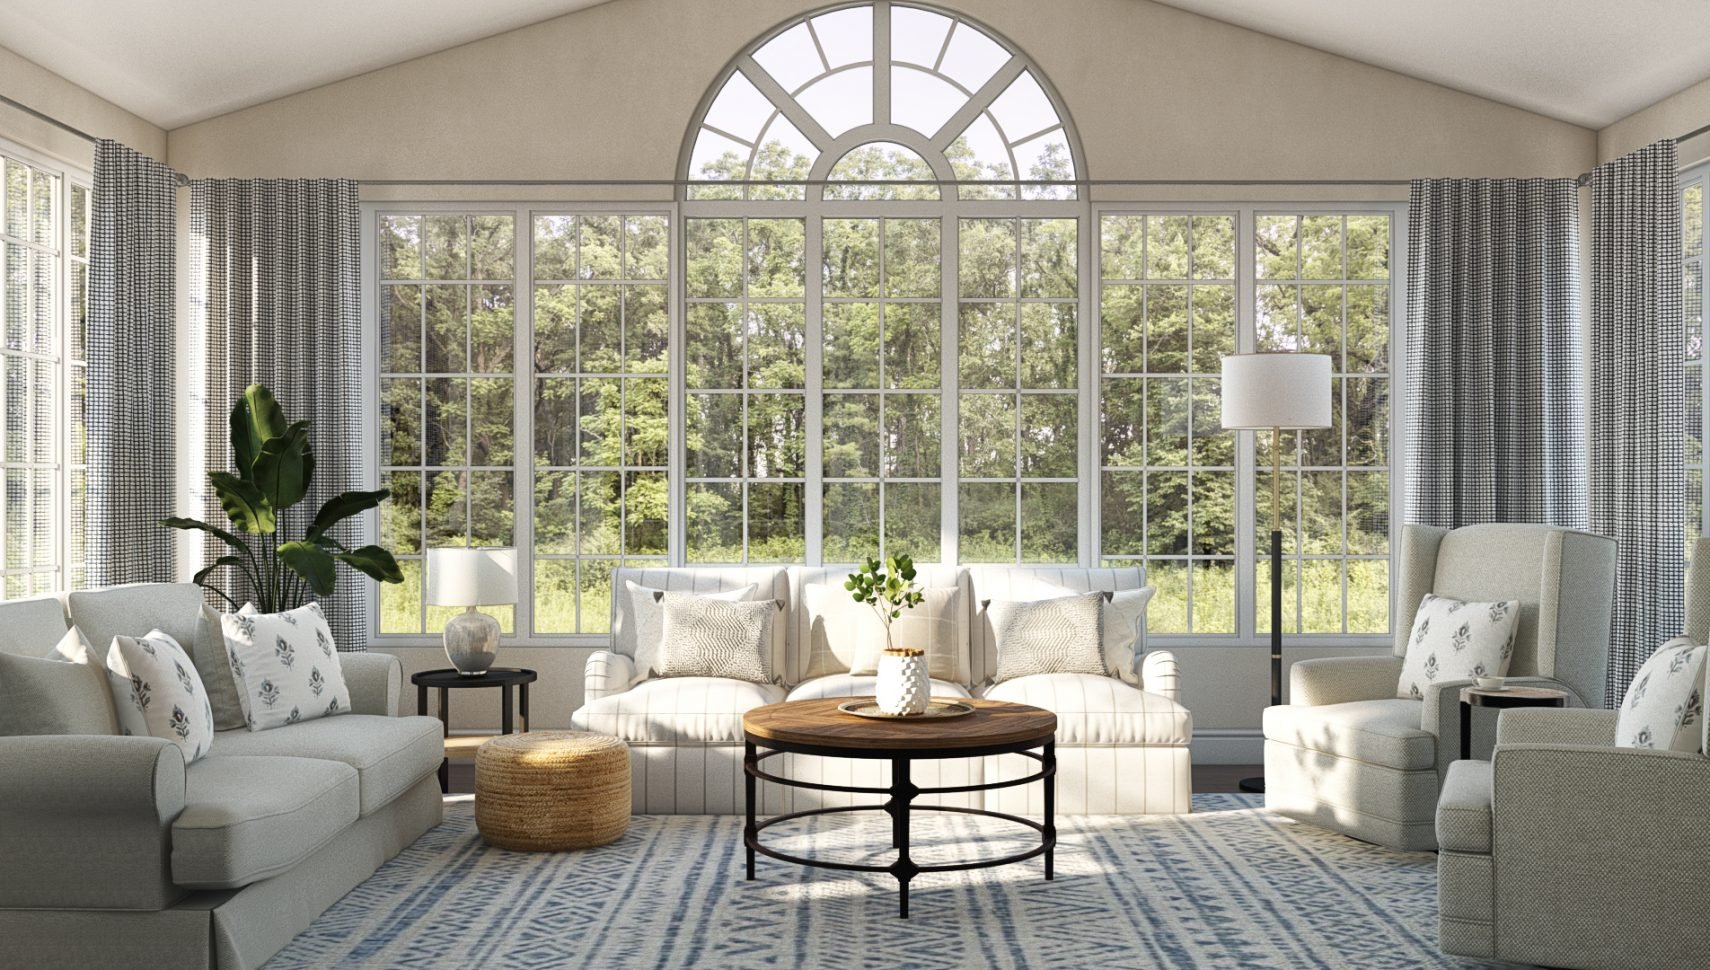 Spacious Neutral Colored Sunroom With Seagrass Pouf